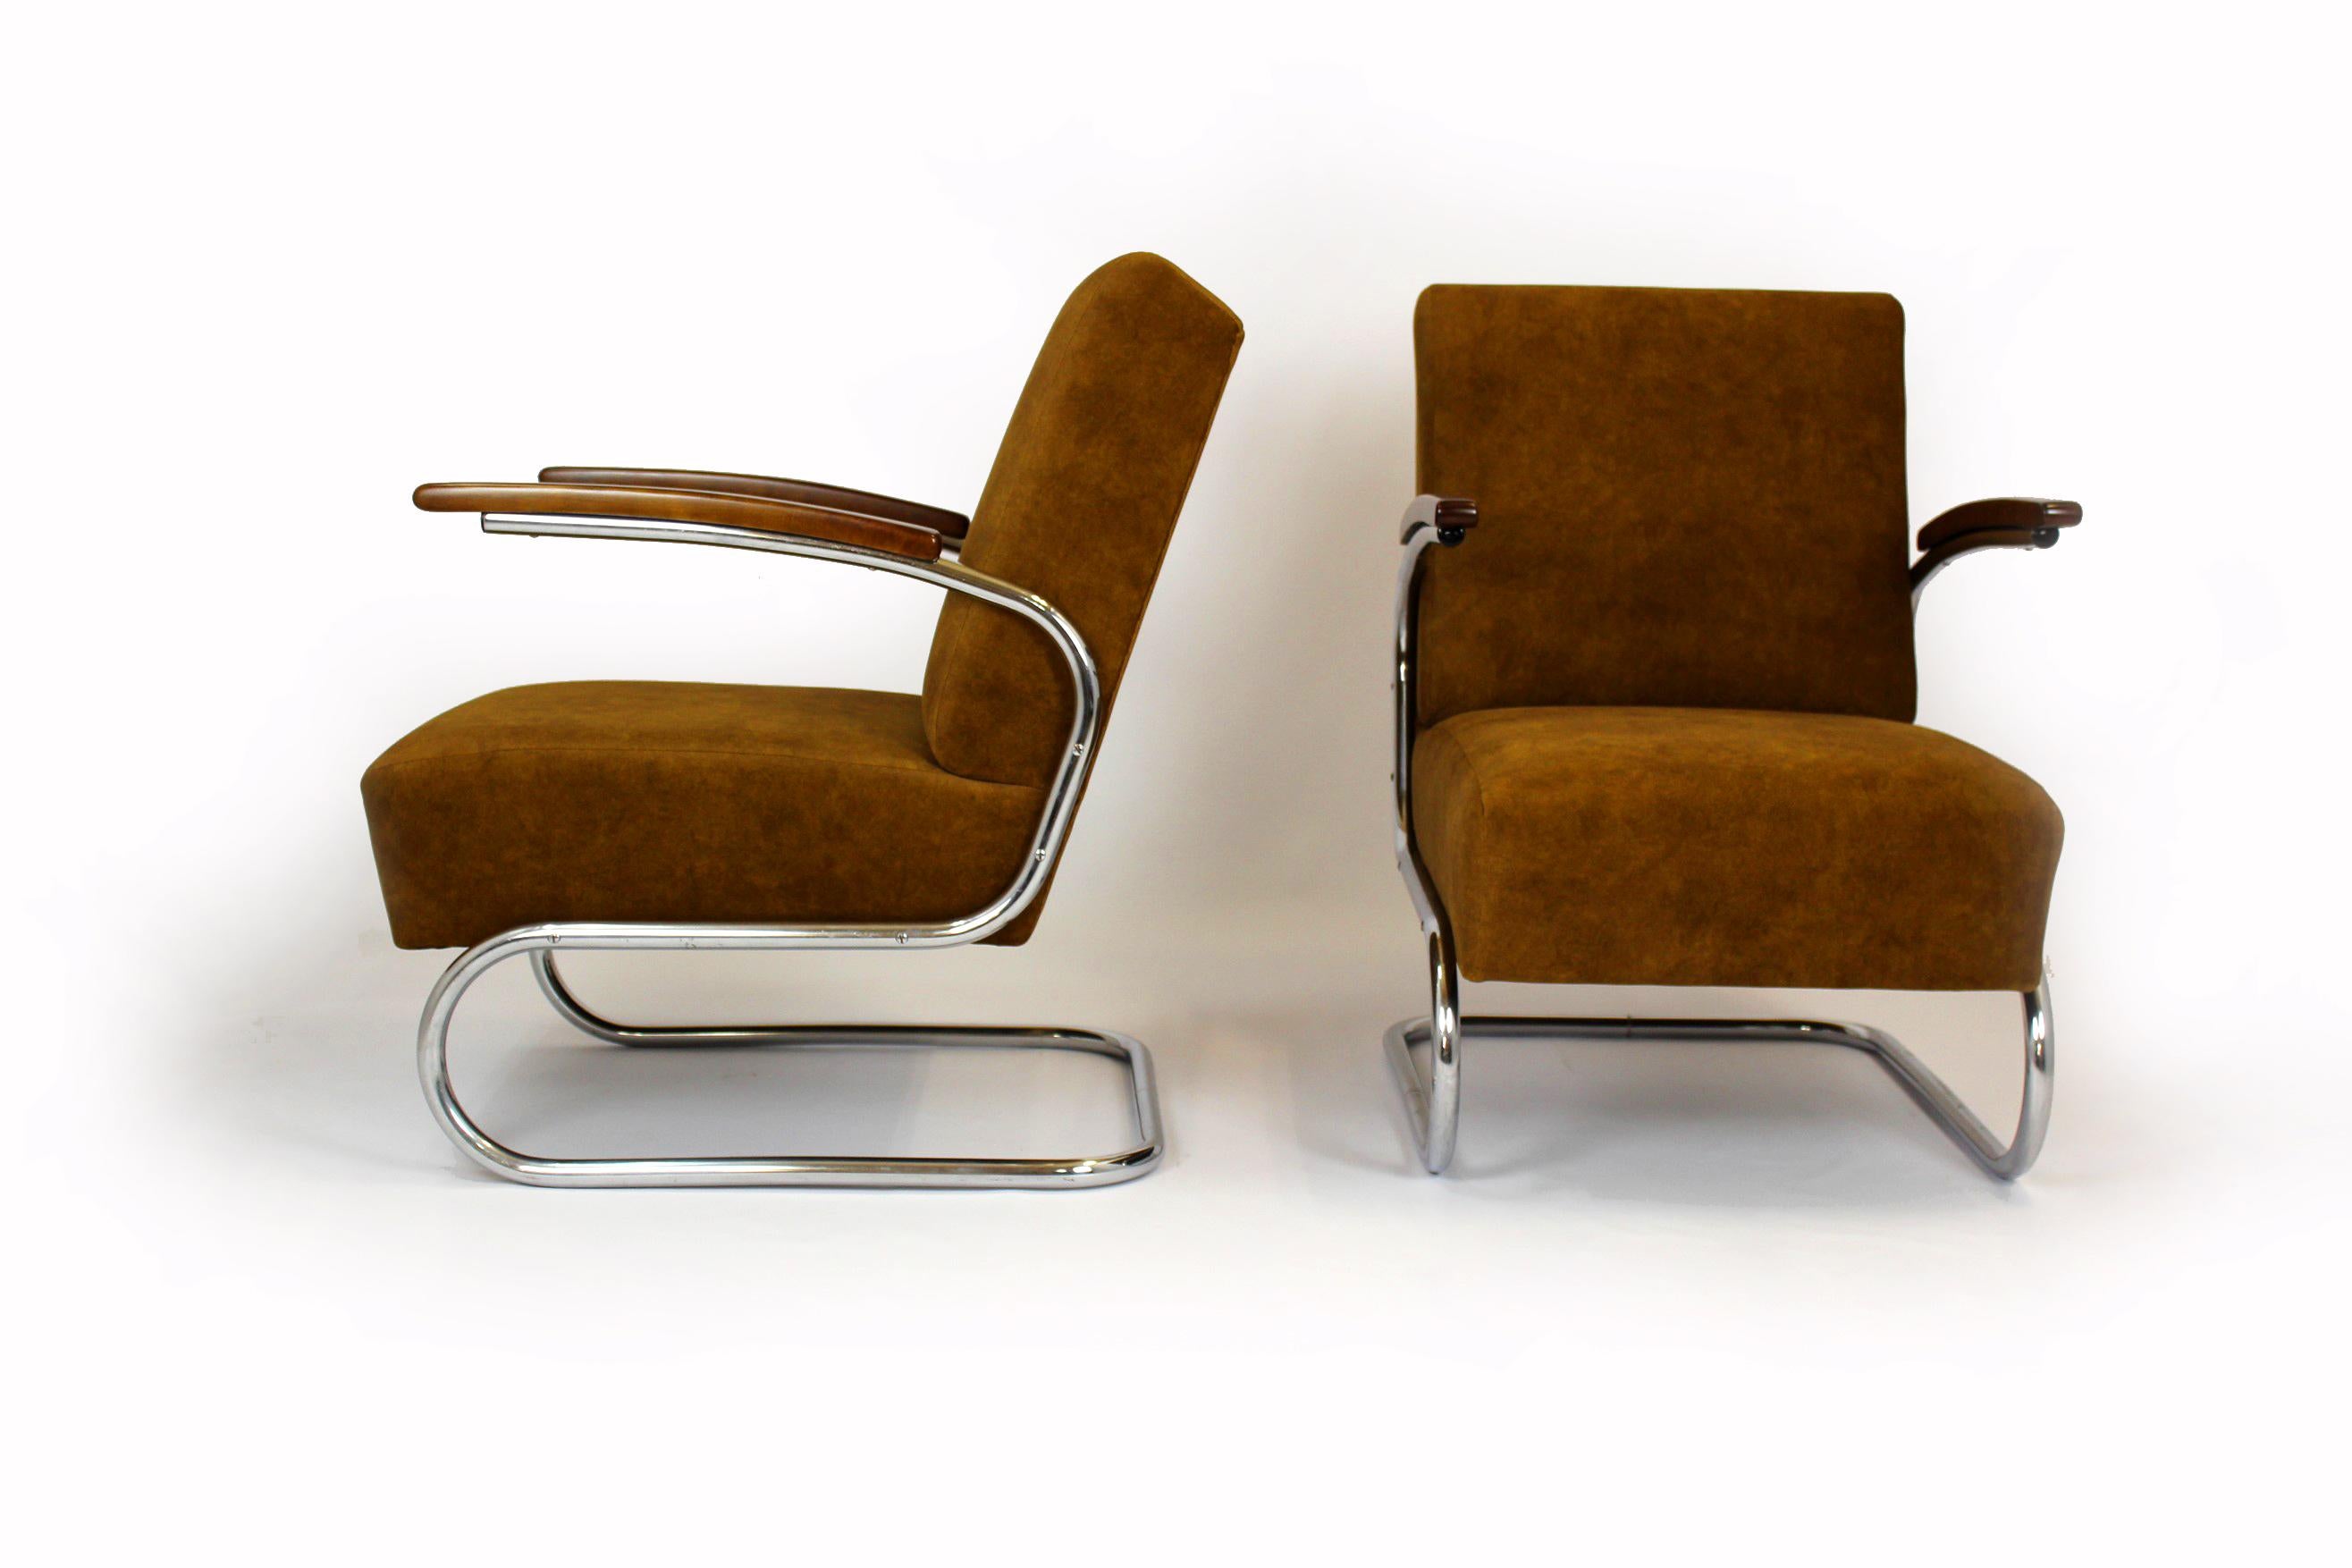 Set of two Bauhaus style cantilever S411 armchairs with a lacquered wood and chrome tubular steel frames. Designed in the 1930s by Willem Hendrik Gispen and manufactured by Mücke Melder under Thonet license.
The armchairs have been completely